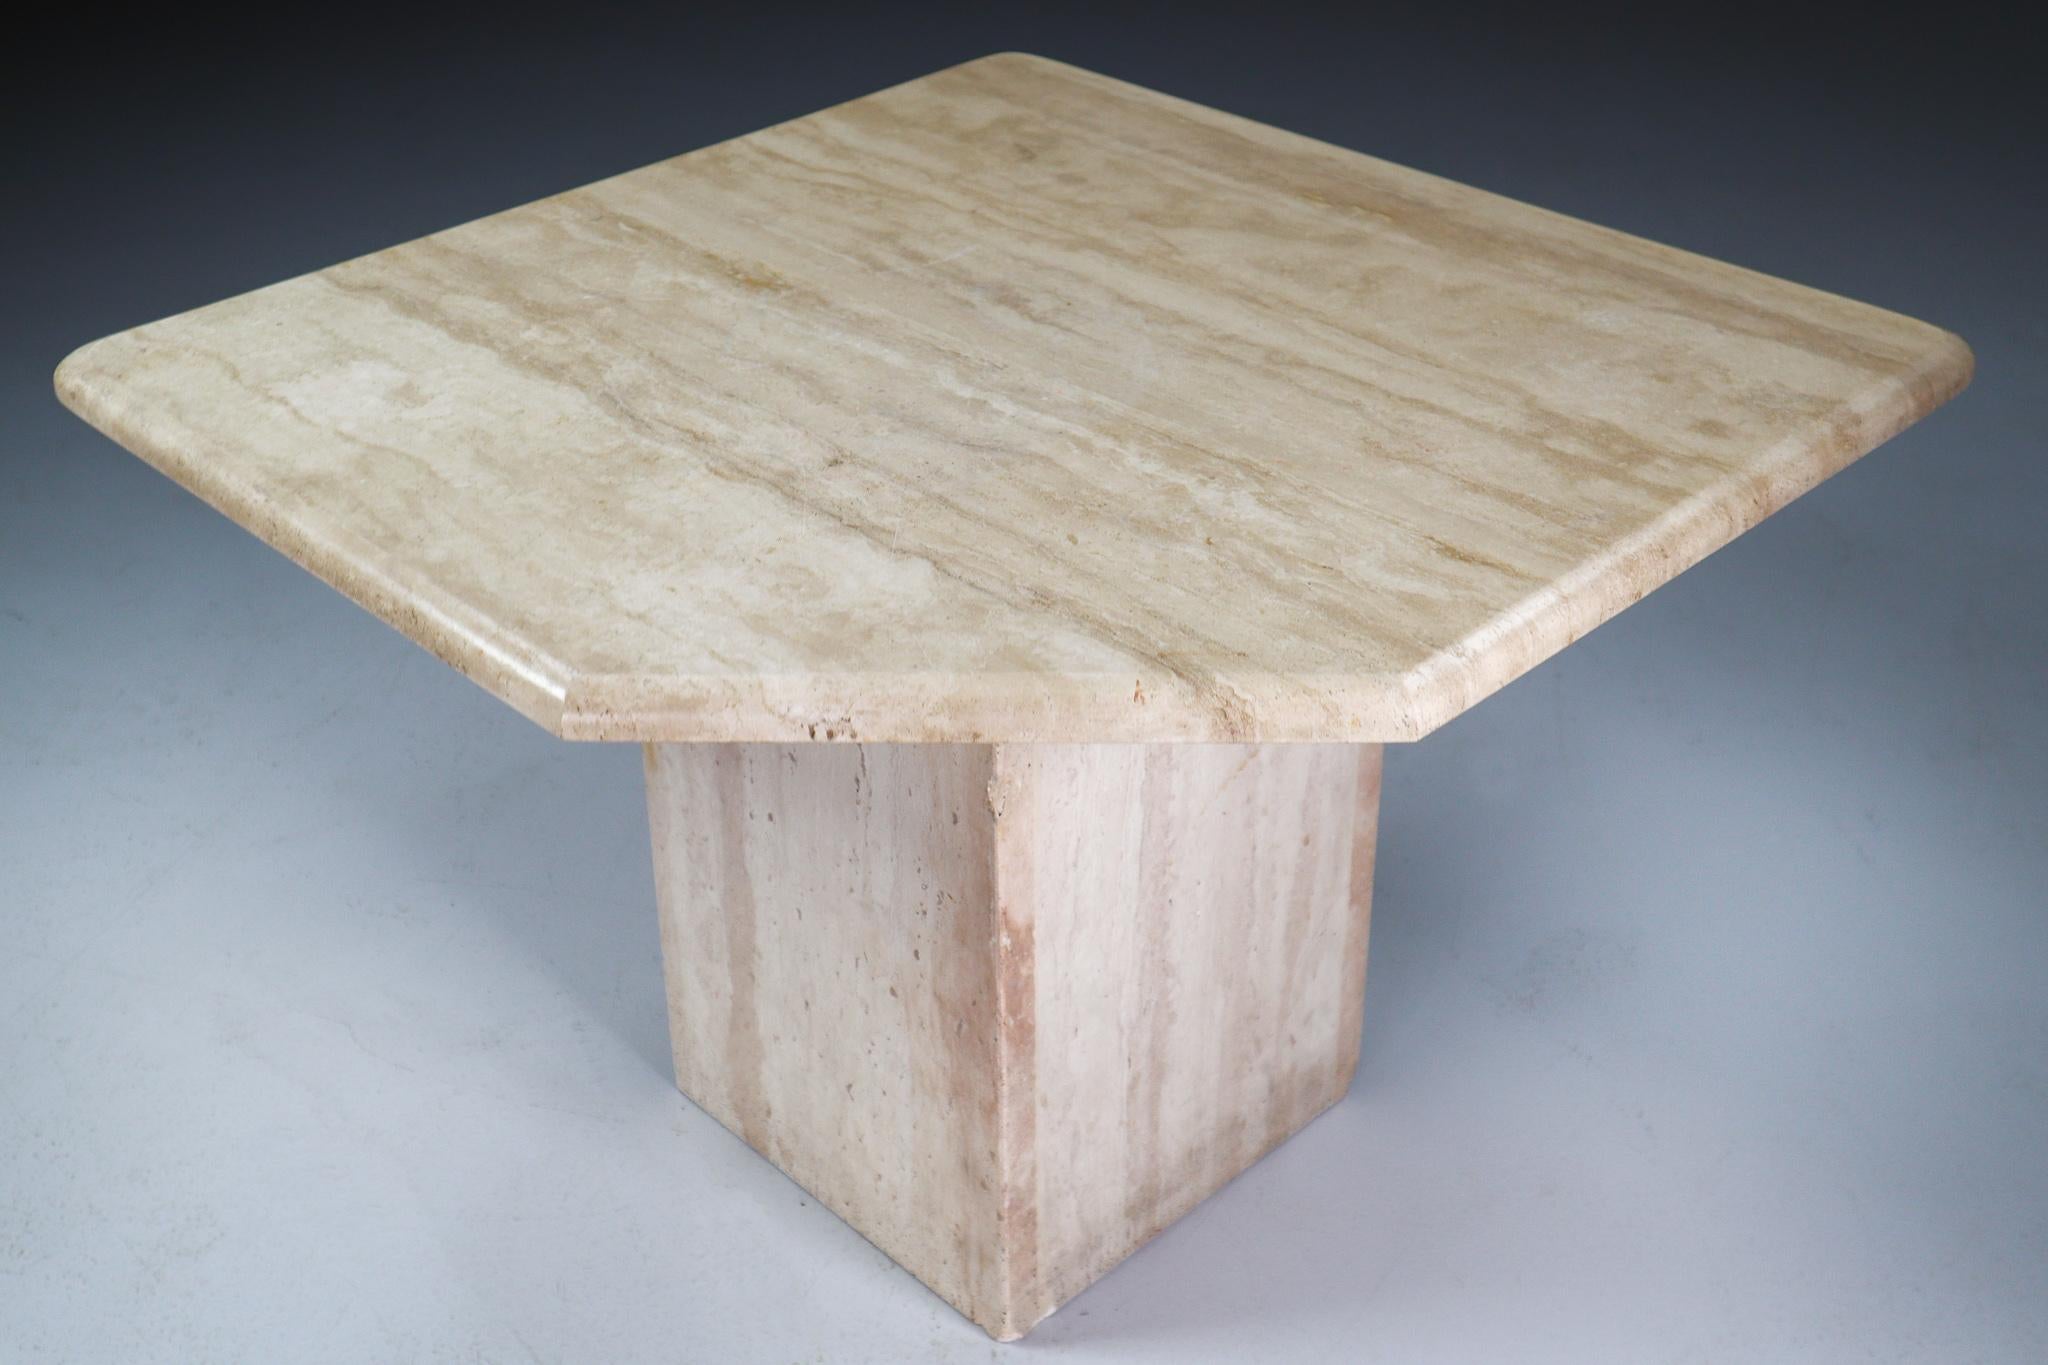 This beautiful post-modern travertine side, coffee table, circa 1970s, has beautiful graining and pentagonal top. This sculptural travertine side table would work great in a Traditional, Transitional, Hollywood Regency, classical or Art Deco room